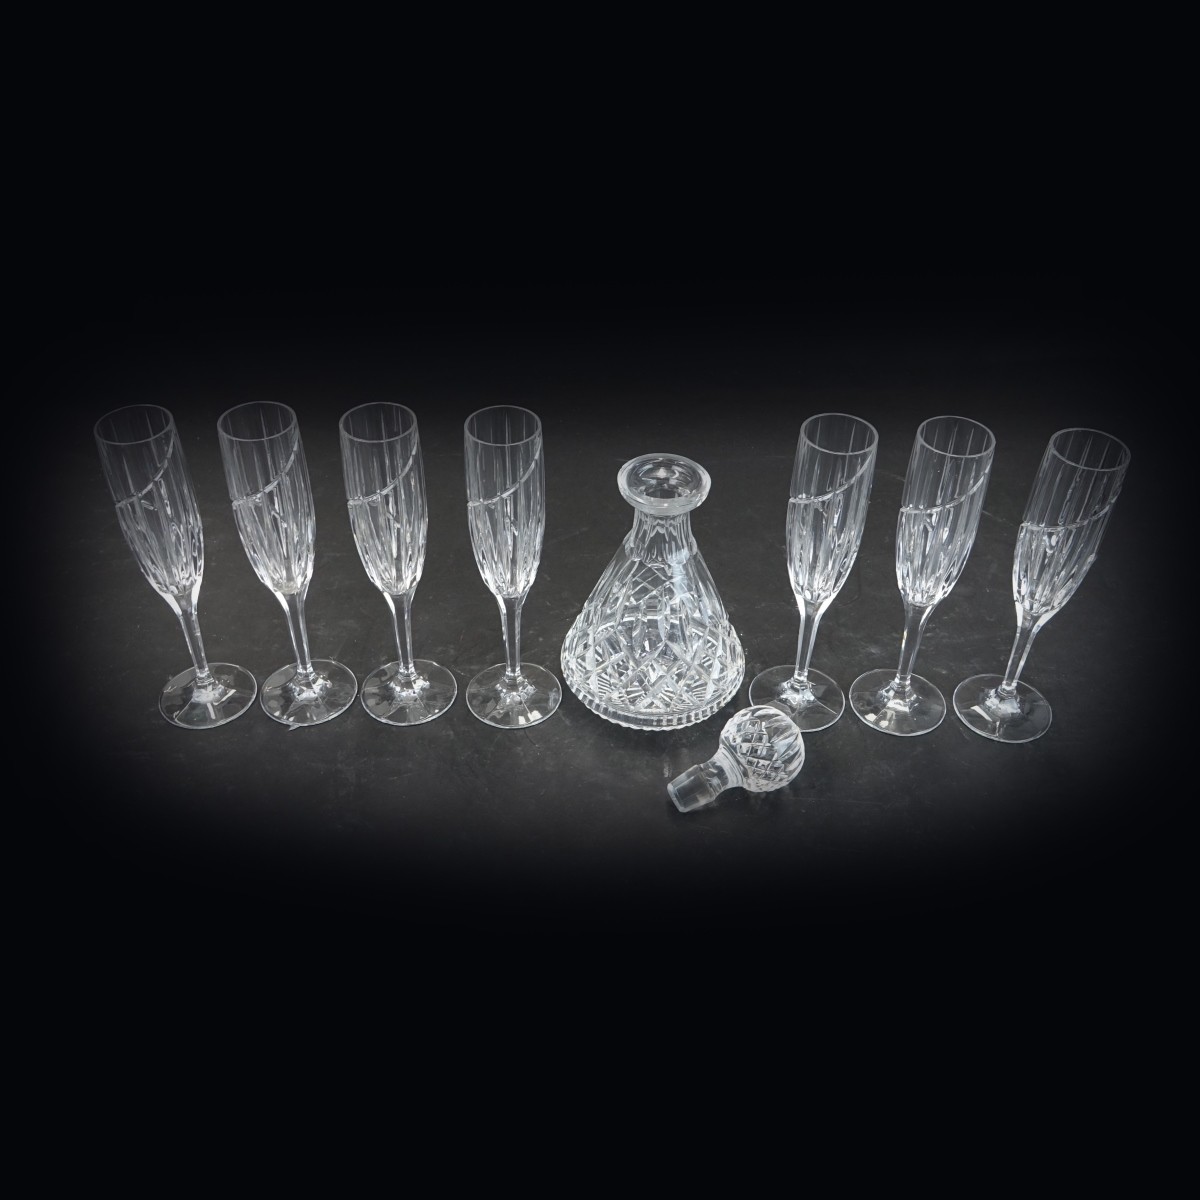 8 pcs Waterford Decanter with Champagne Glasses